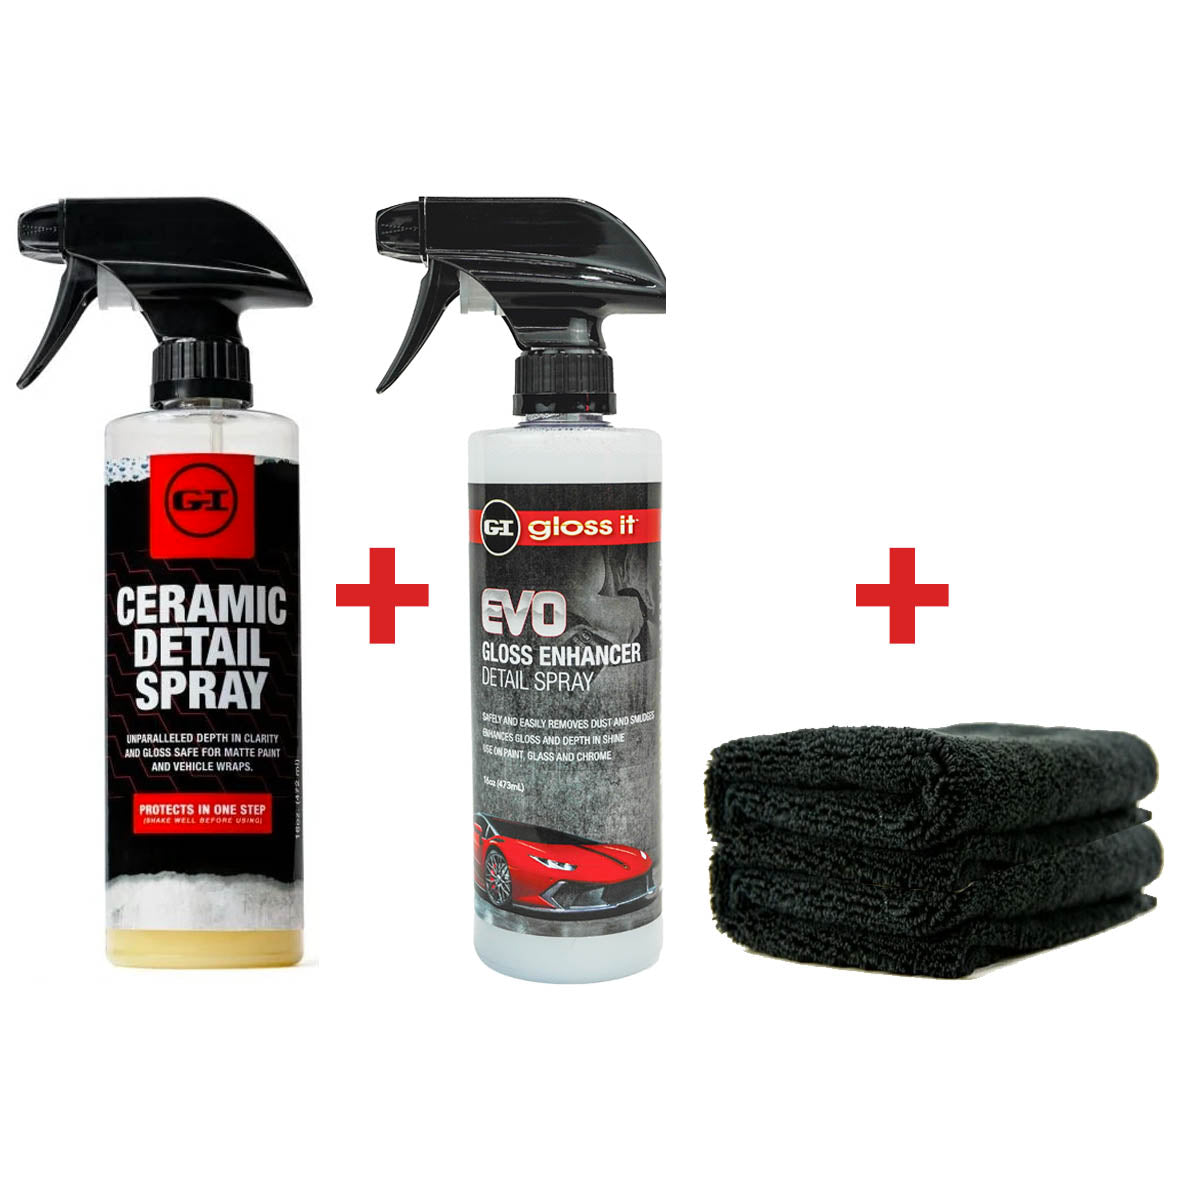 Ceramic Detail Spray | Monthly Subscription